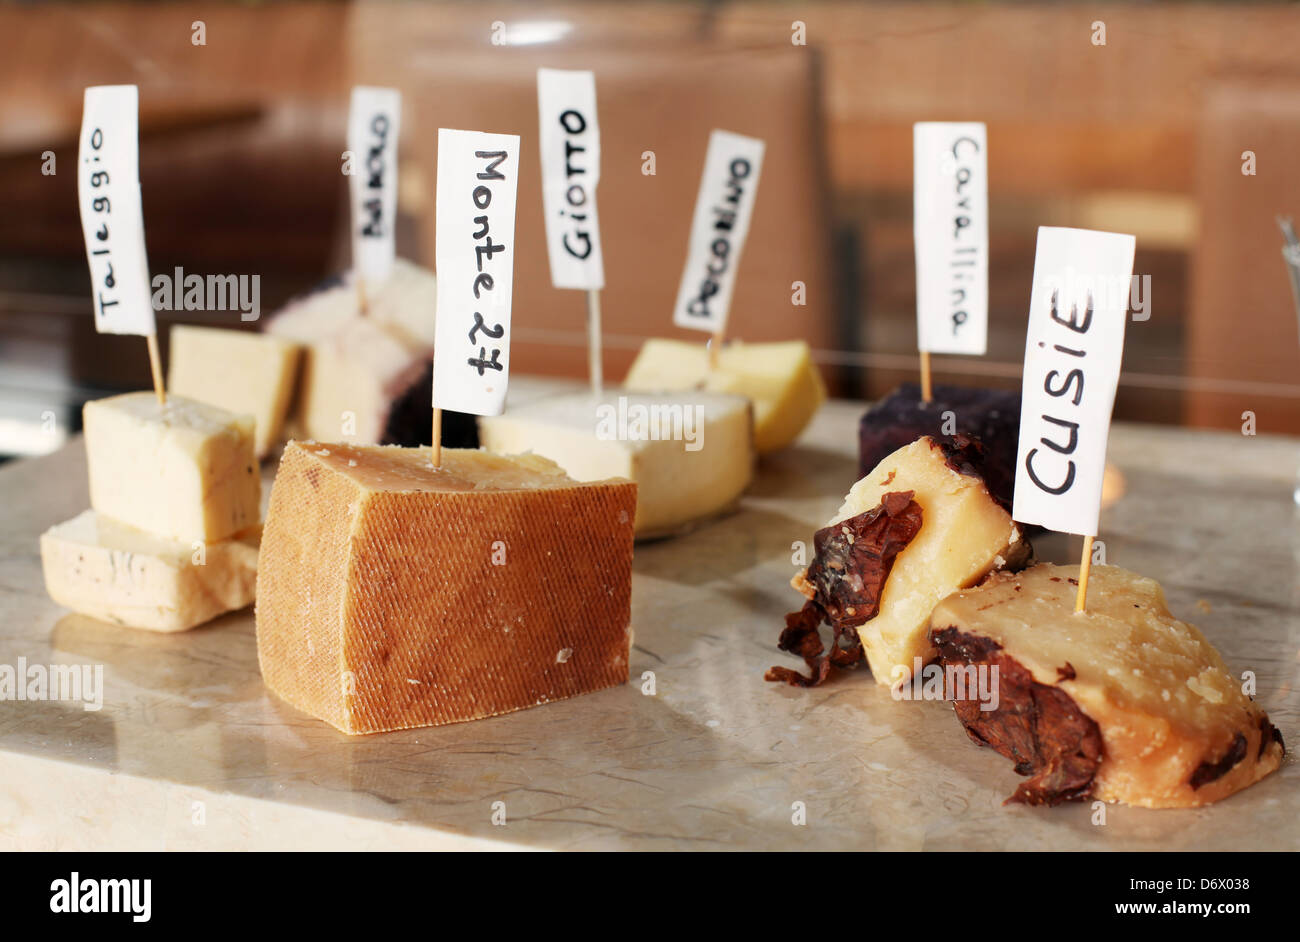 Assortment of cheeses with names. Stock Photo